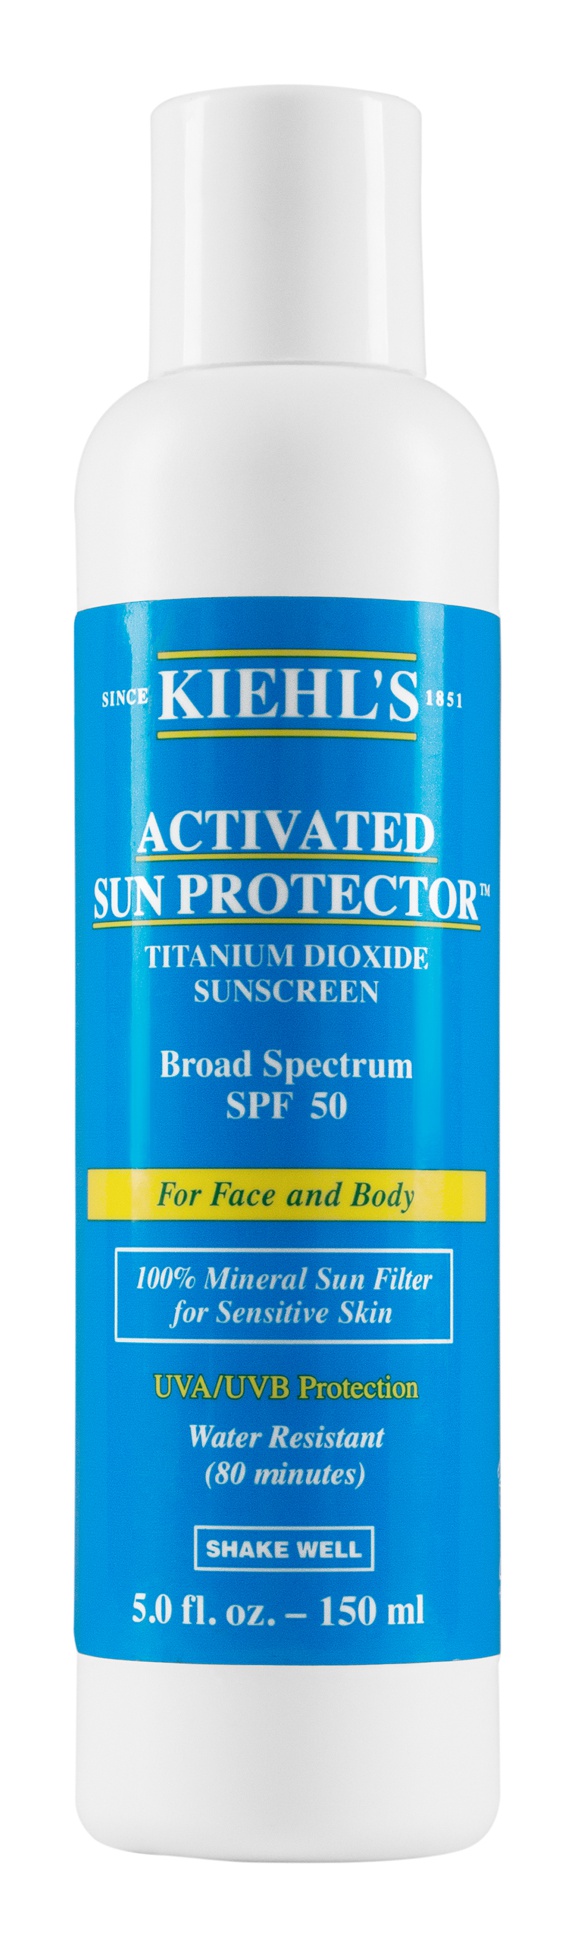 Kiehl’s Activated Sun Protection Sunscreen Spf 50